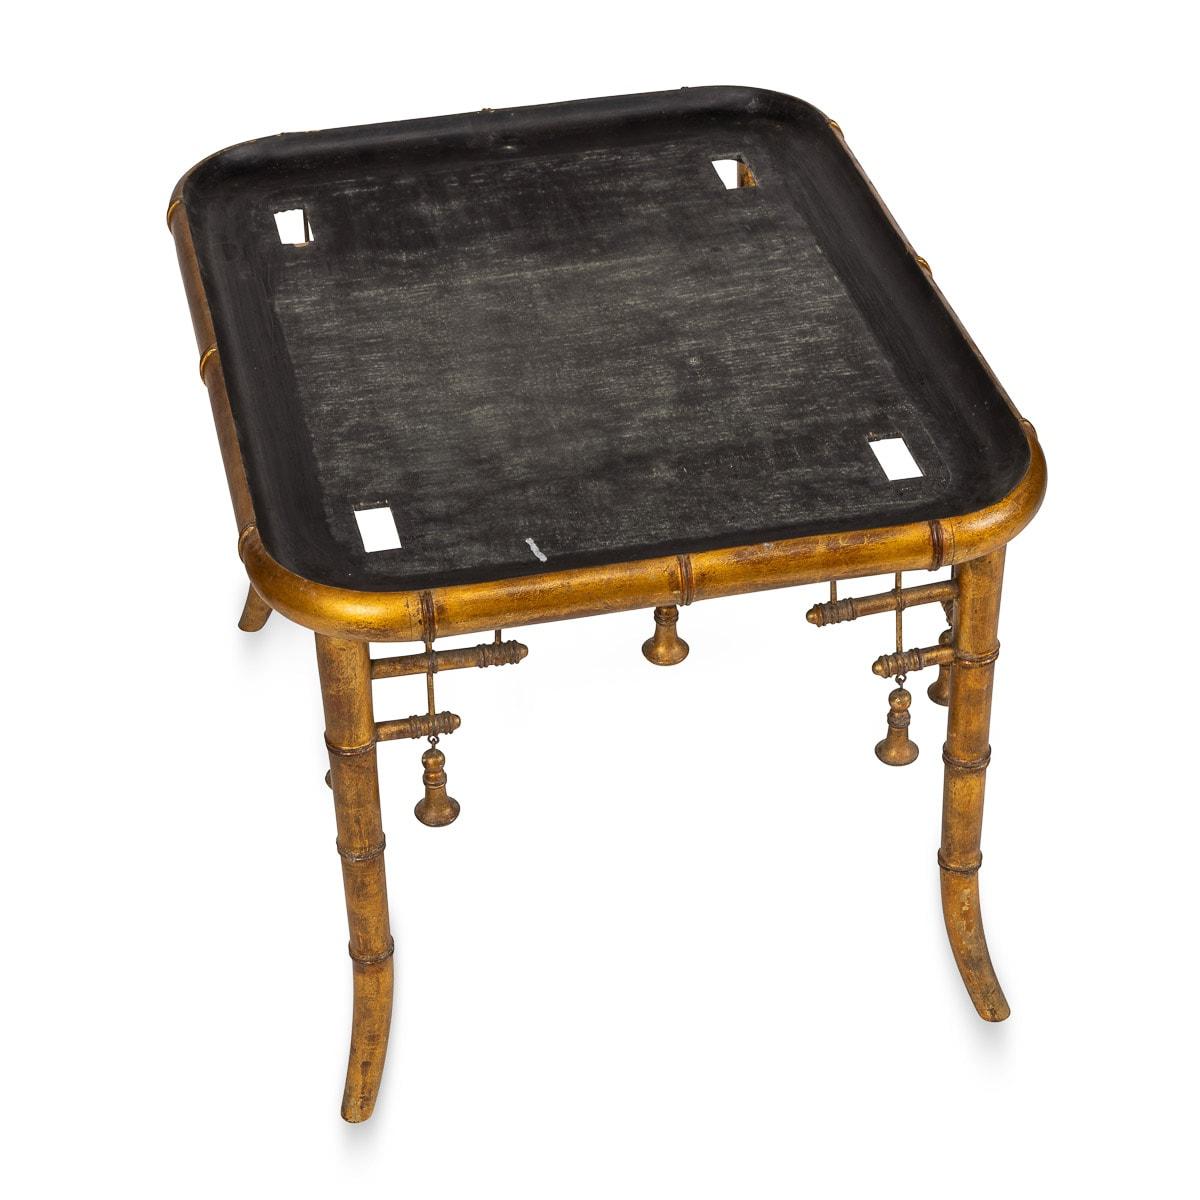 20th Century French Giltwood & Japanese Style Lacquer Table with Tray, C.1880 For Sale 3